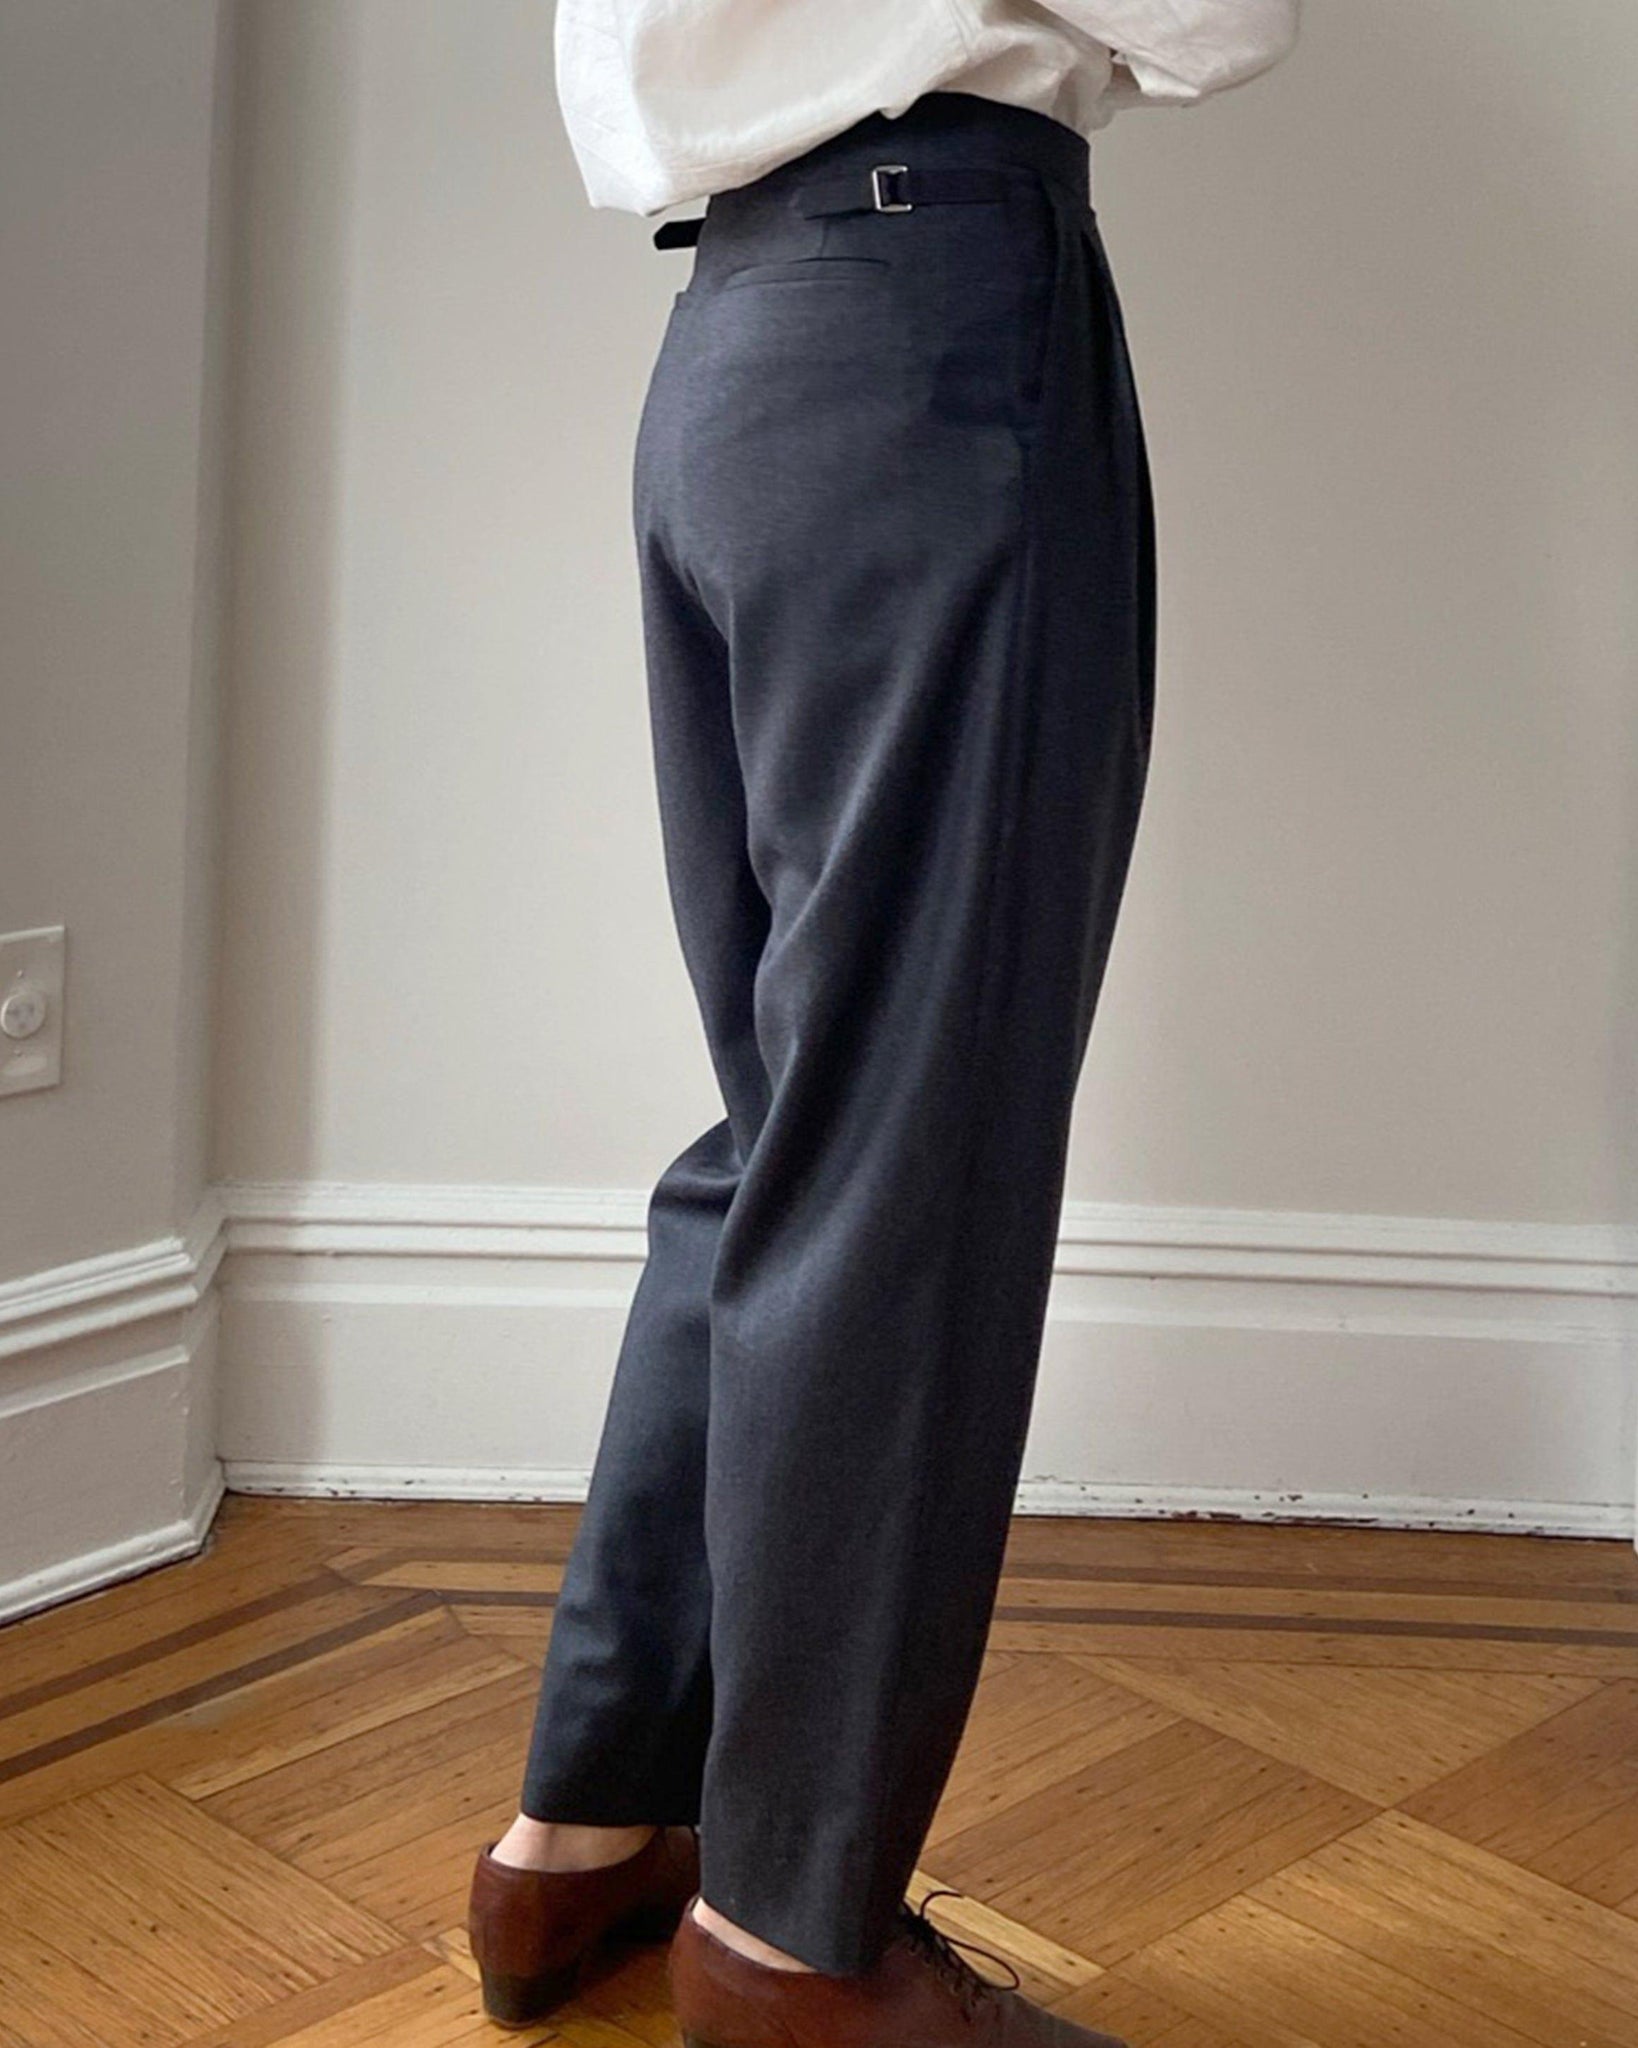 THE Trouser in tropical rws wool by 4 in PANTS